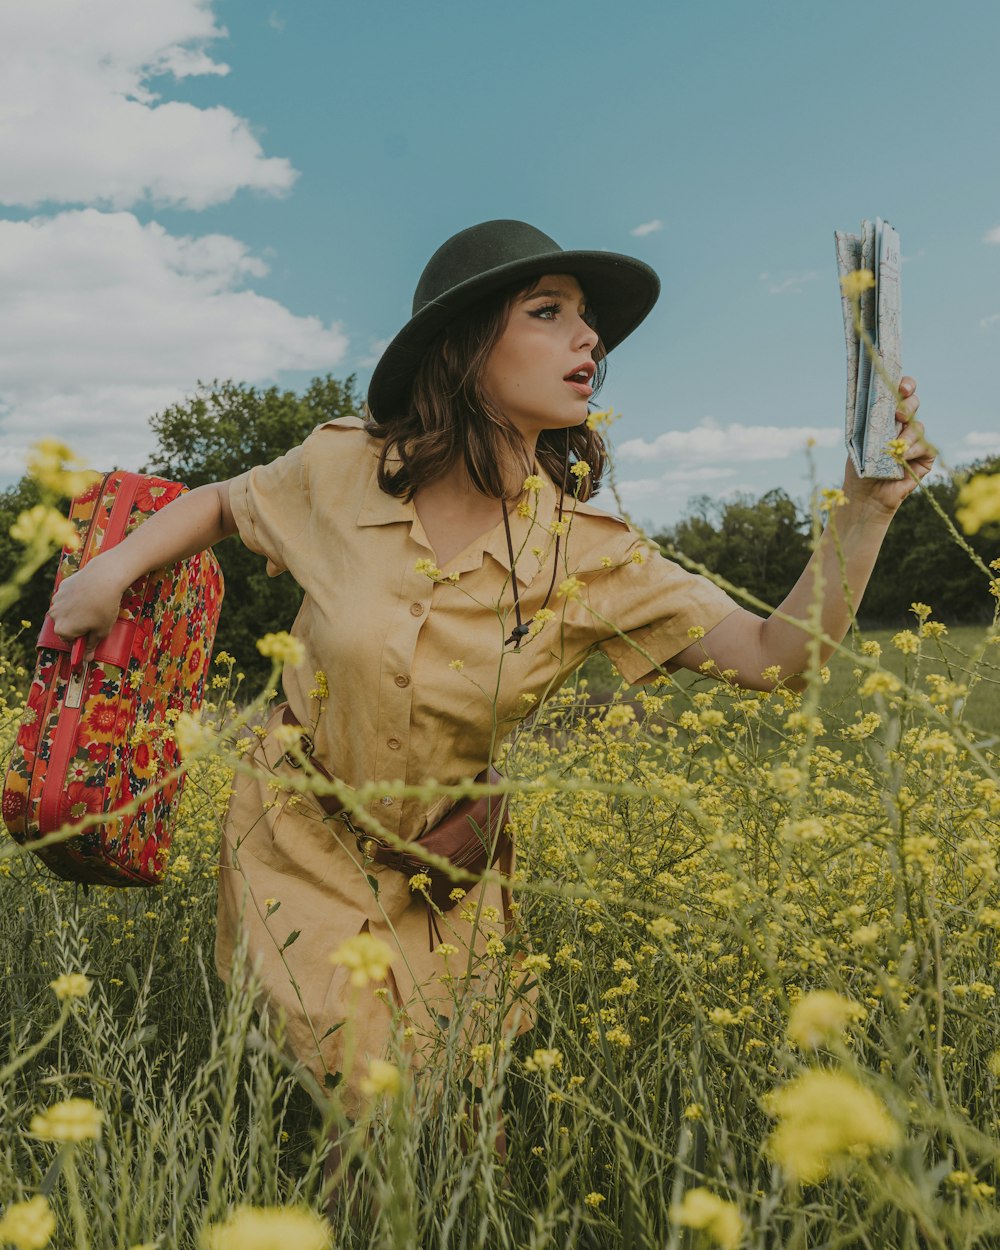 woman in brown dress and black hat standing on yellow flower field during daytime